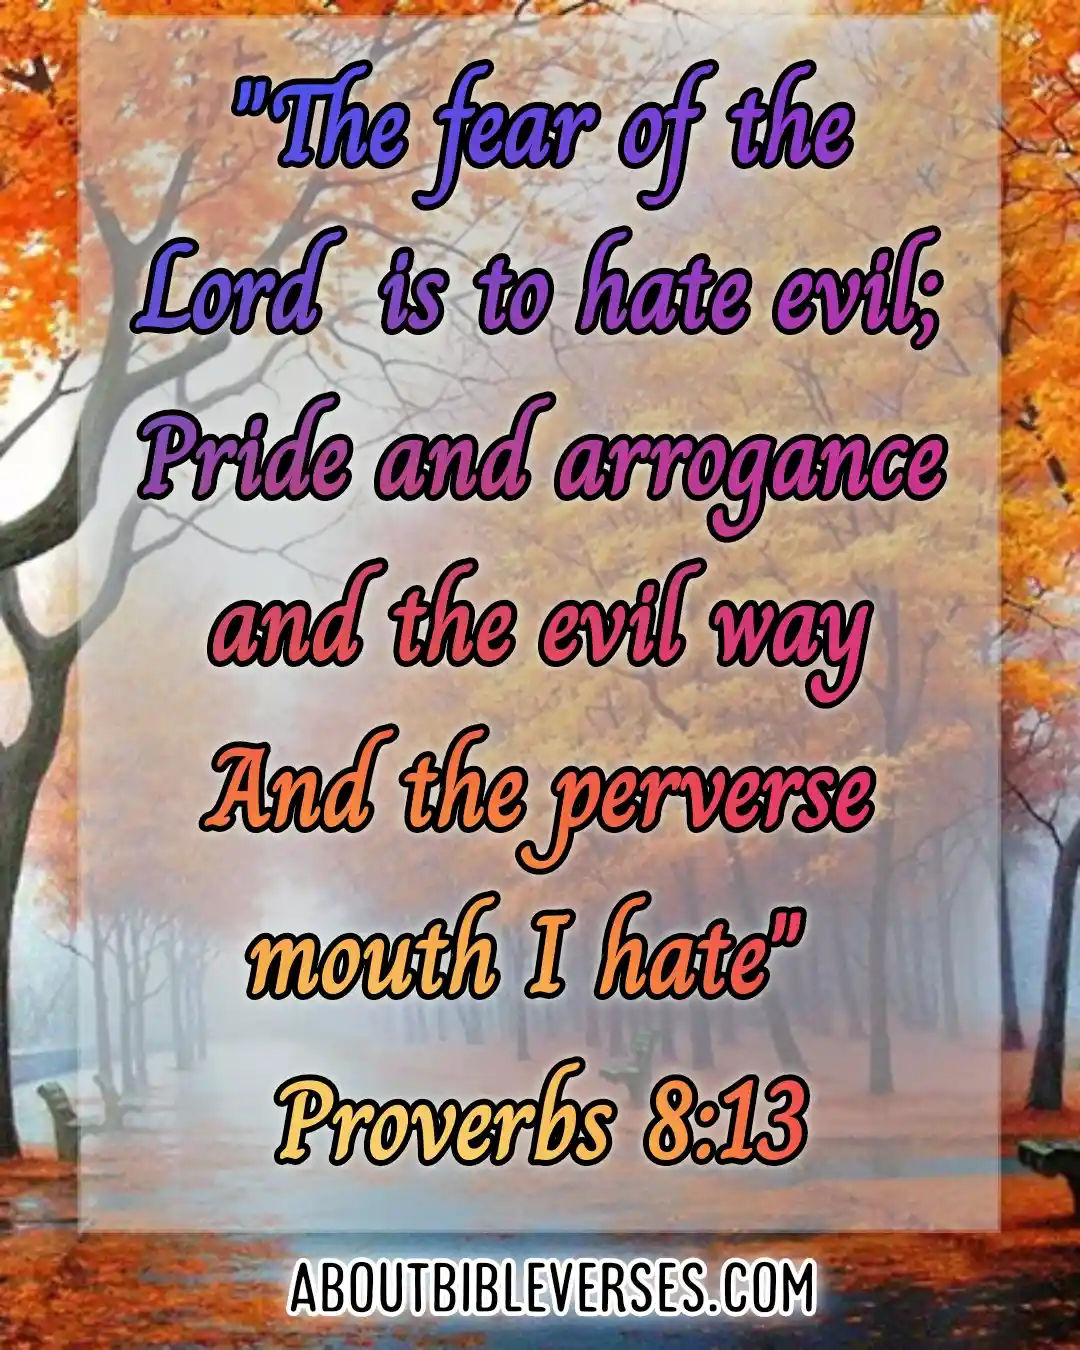 Bible Verses To Protect You From Evil (proverbs 8:13)